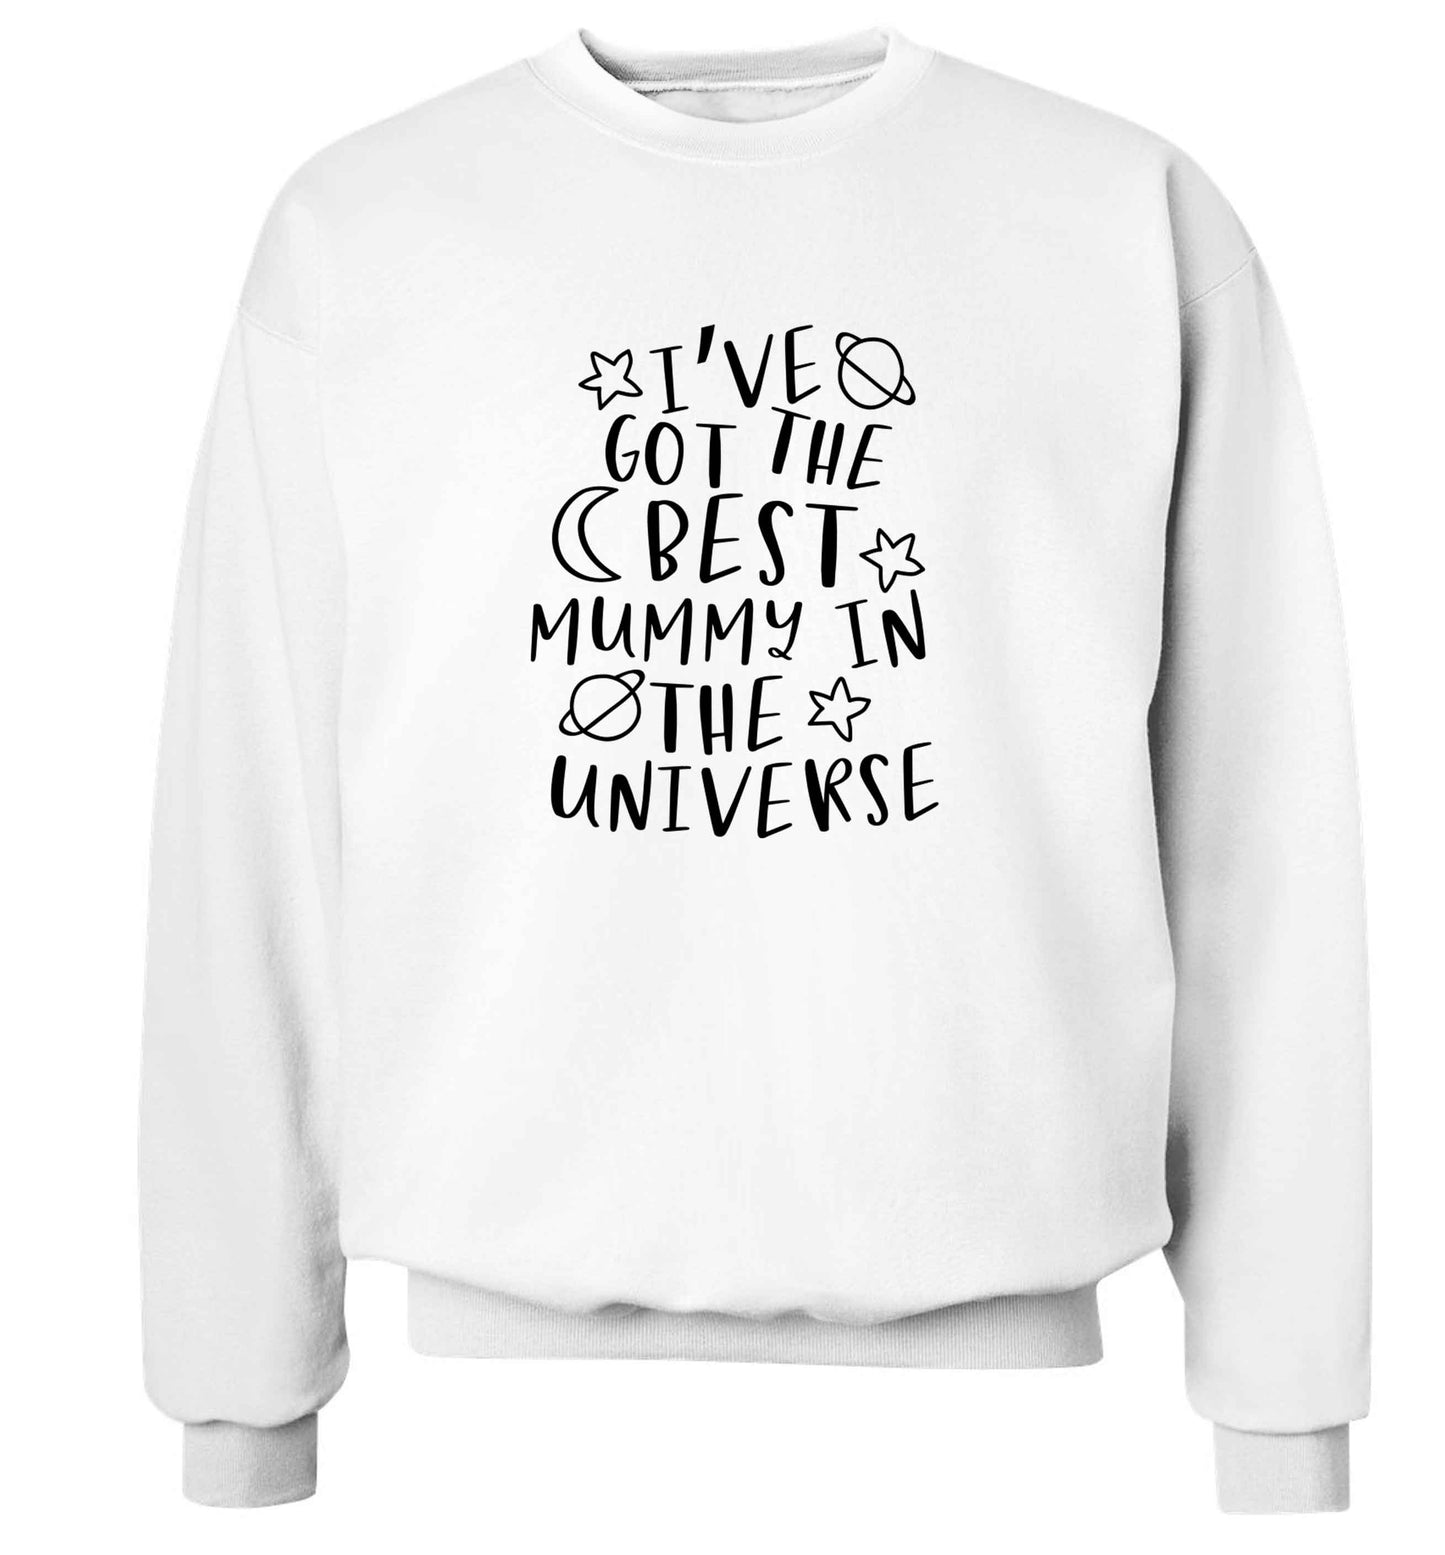 I've got the best mummy in the universe adult's unisex white sweater 2XL